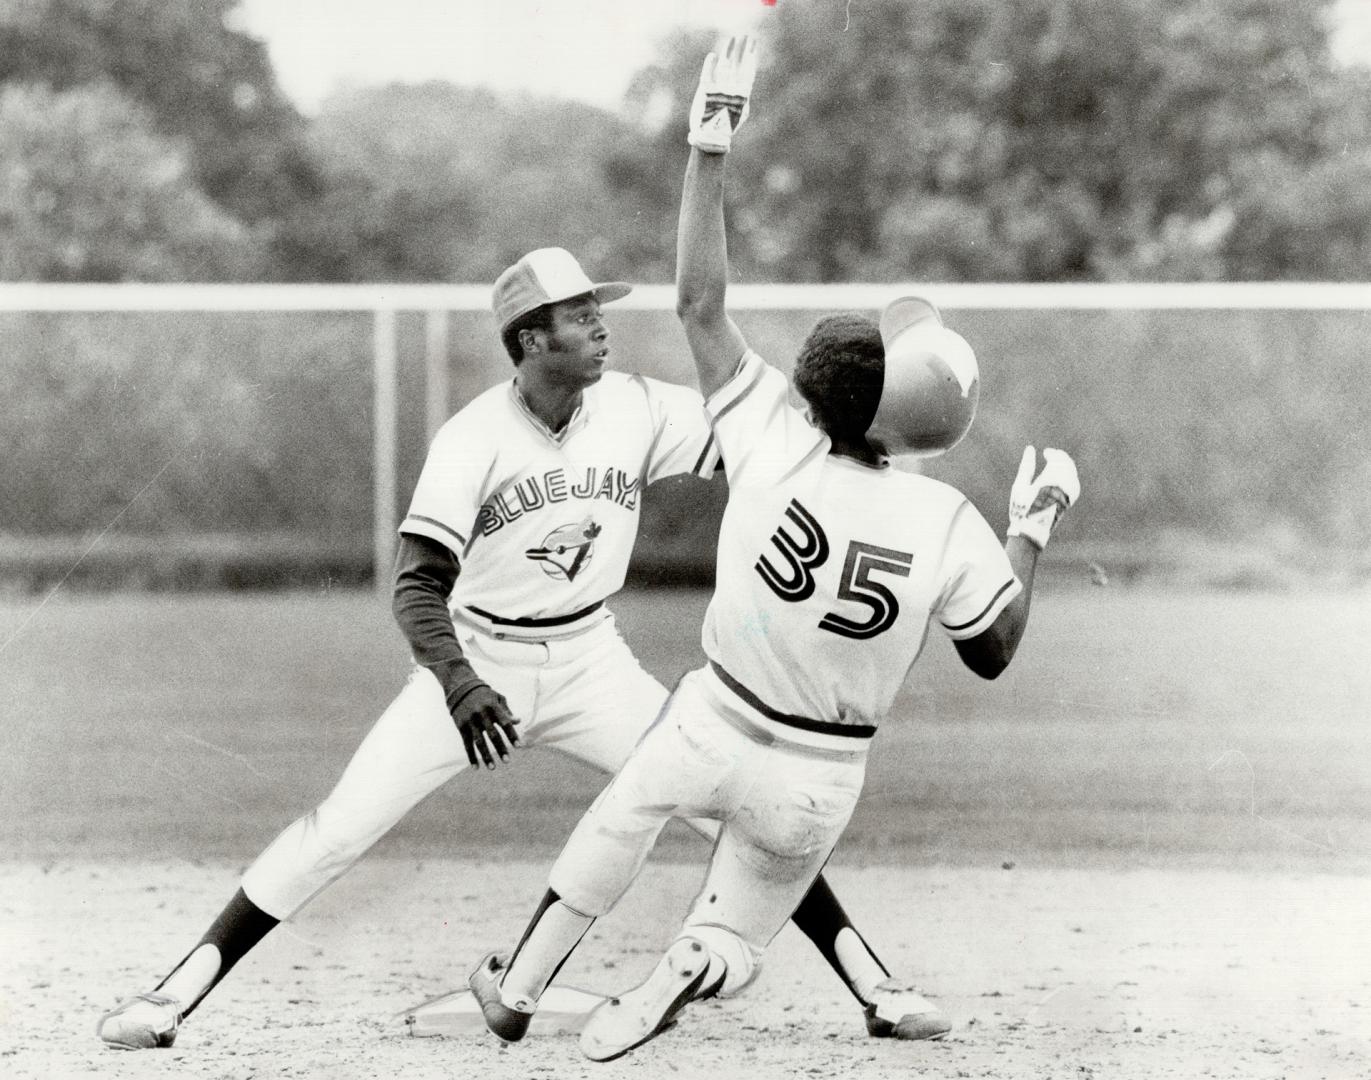 It's rookie against rookie as shortstop Alfredo Griffin takes throw to catch Ted Wilborn